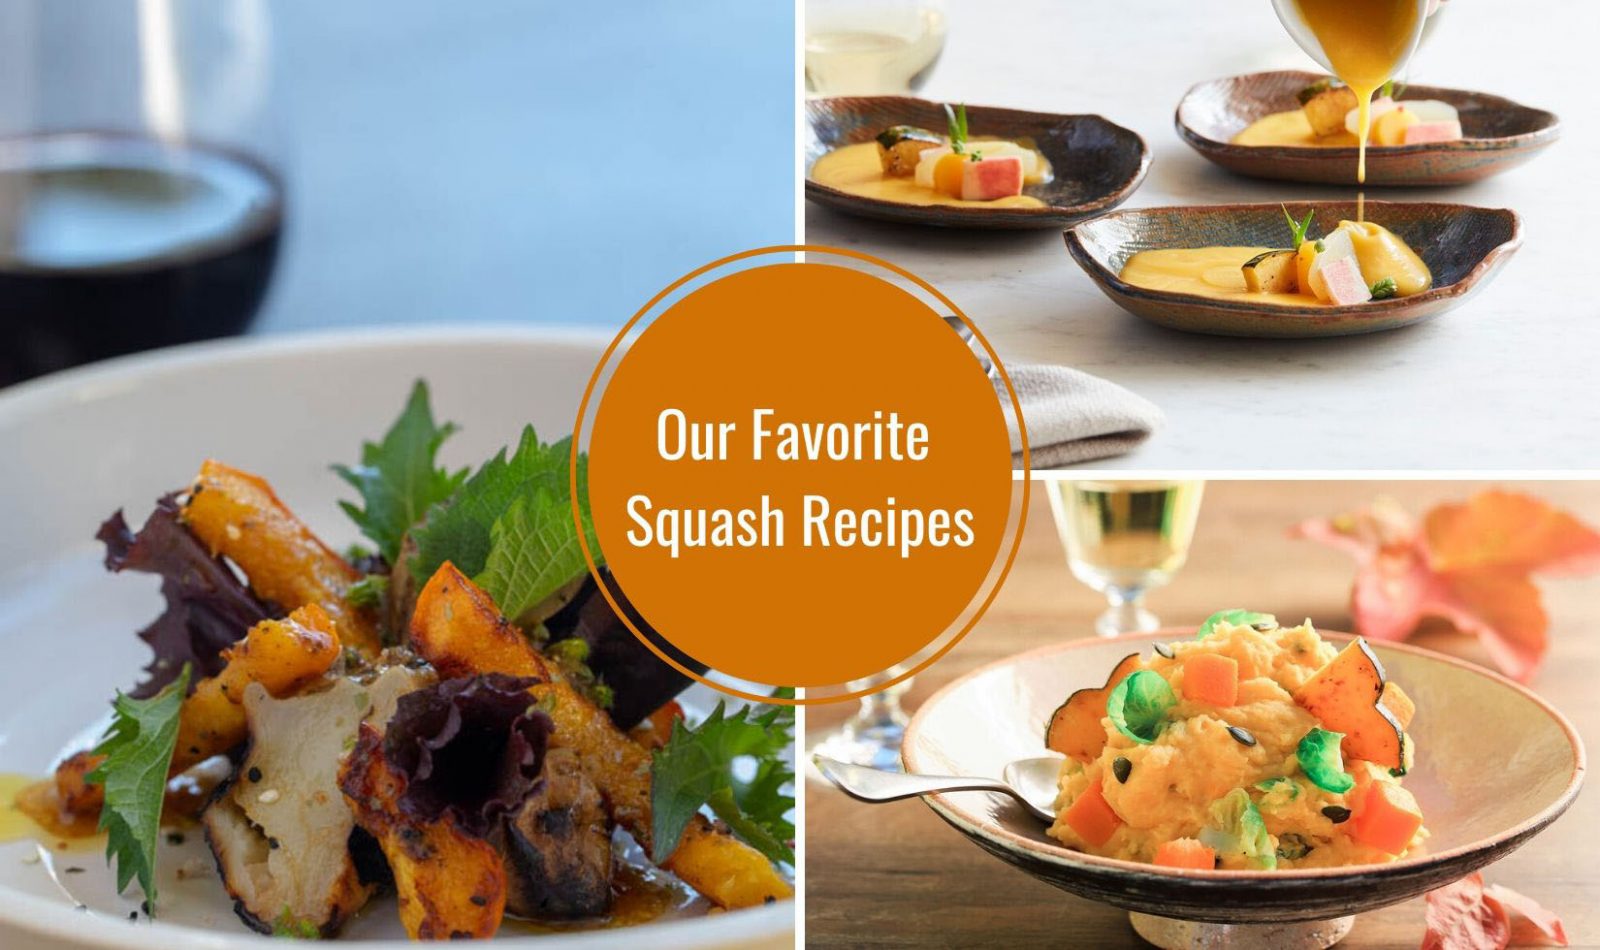 photo collage of three Jordan Winery squash dishes with image text "our favorite squash recipes"